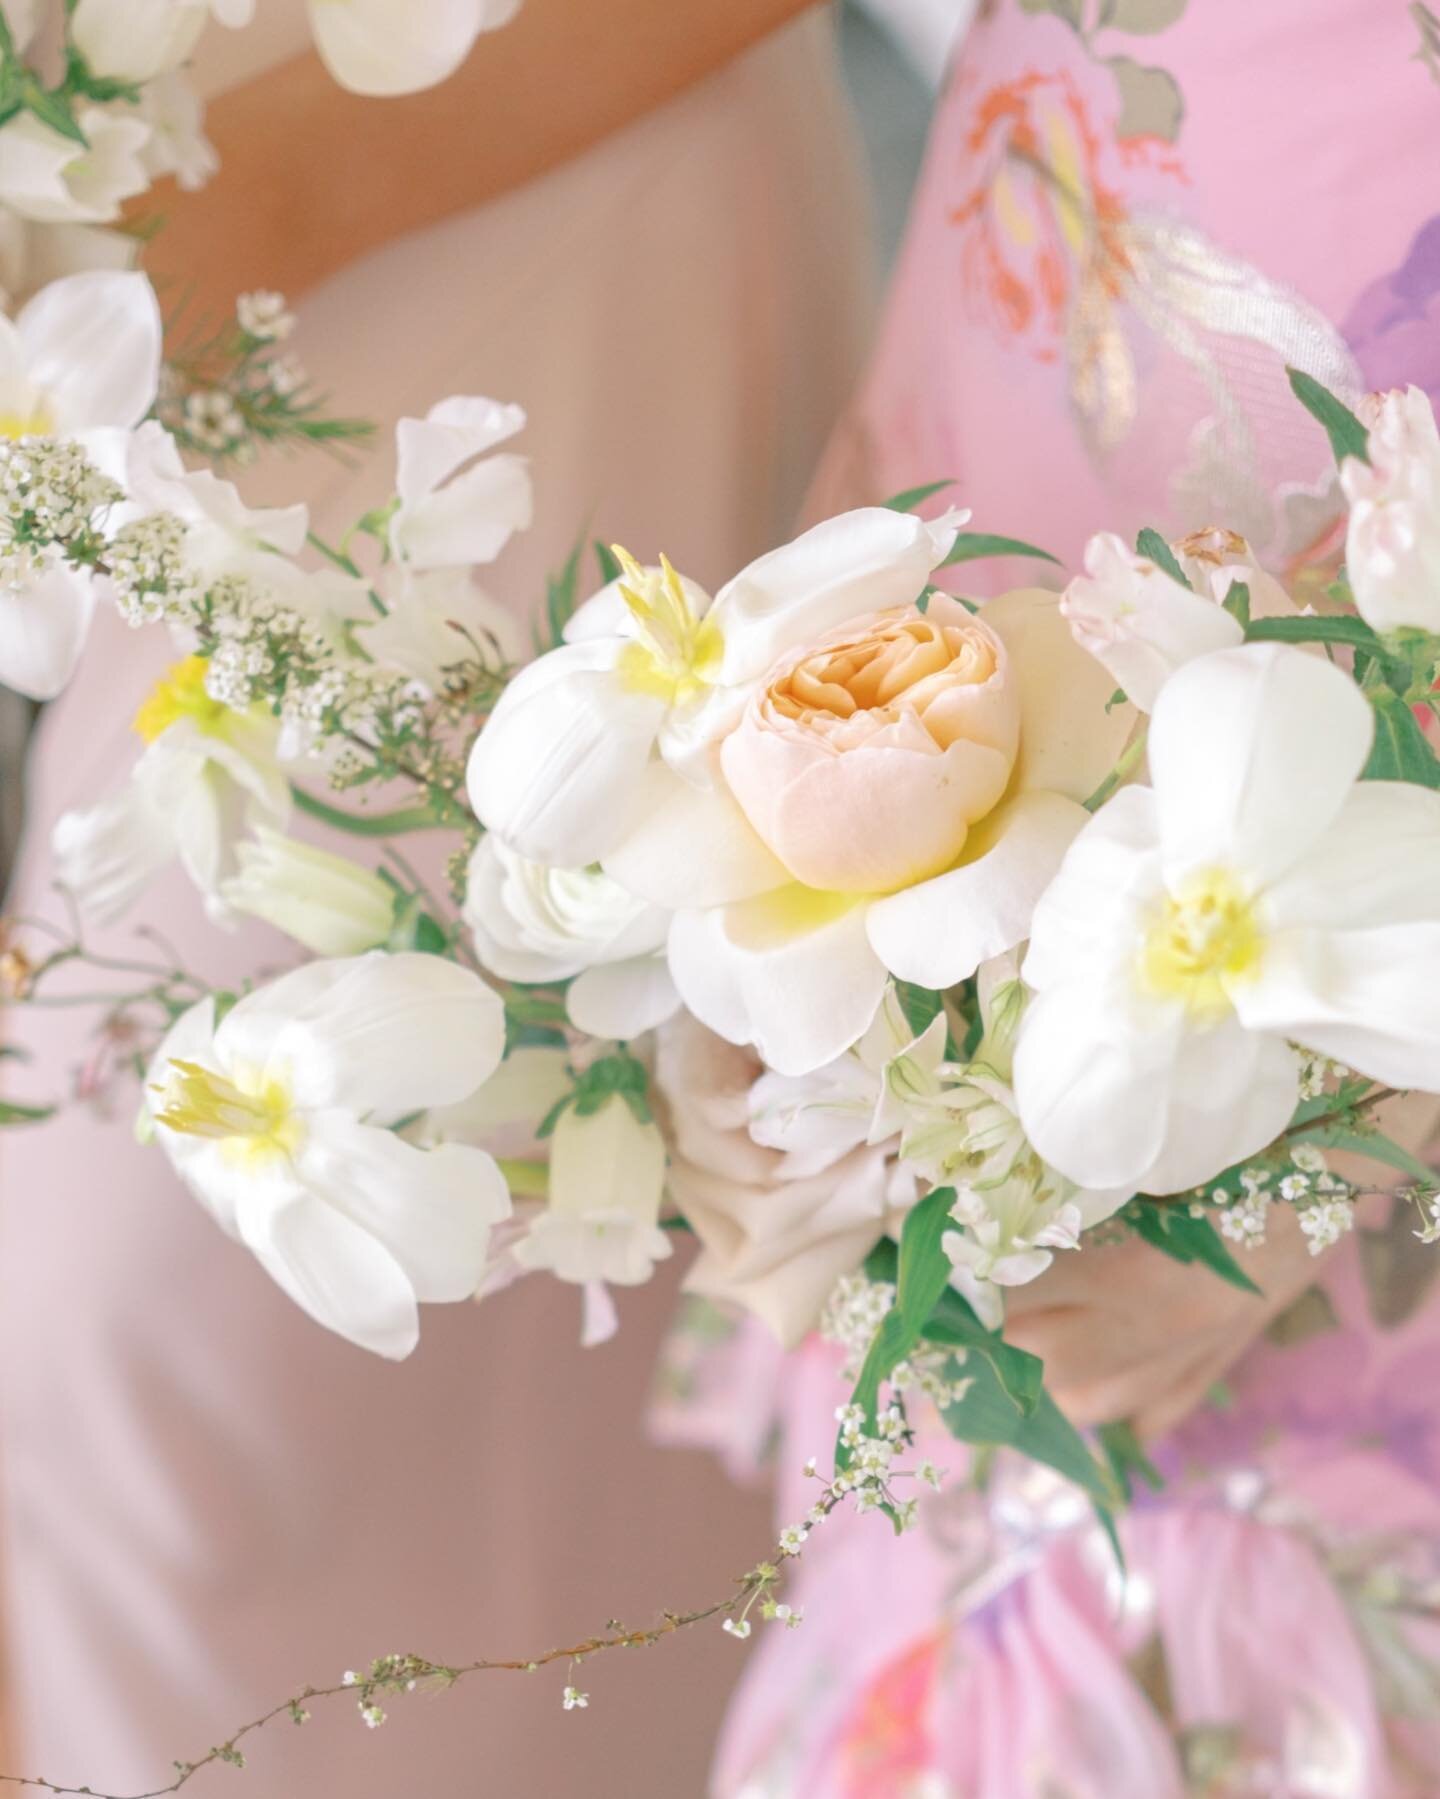 We are in the midst of winter here in the Midwest USA and I know we could all use a little dose of sunshine and warmth by way of these yummy, springy,  and joyful moments from this iconic day!

Grateful for these fabulous wedding pros:
Venue: @hotel_